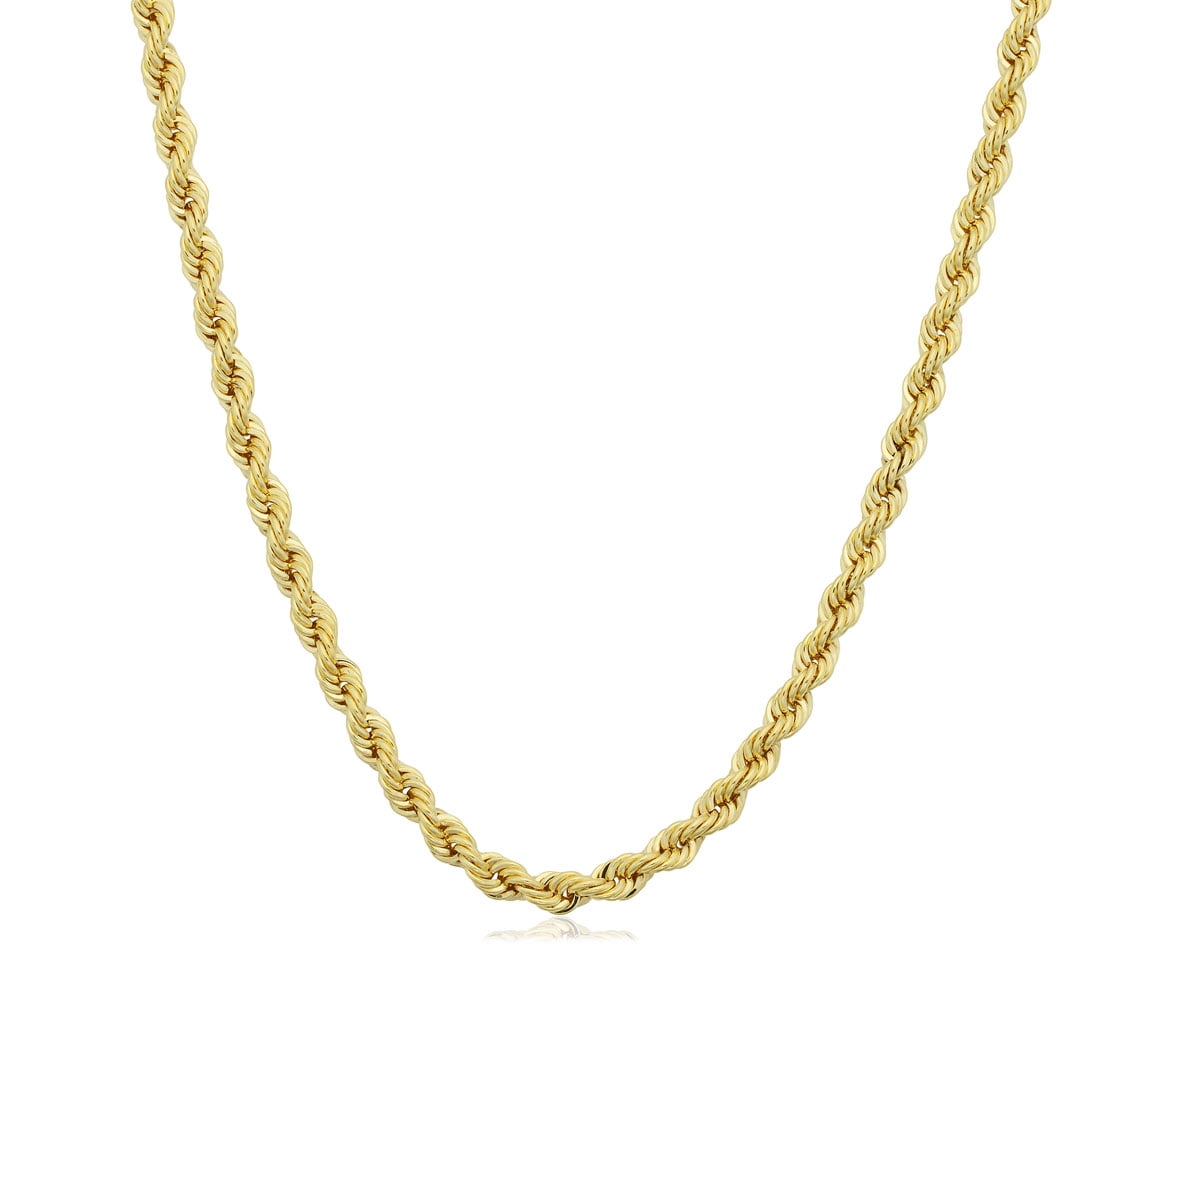 24 20 14K Yellow Gold 2.5mm Italy Rope Chain Twist Link Necklace 16,18 22 26 